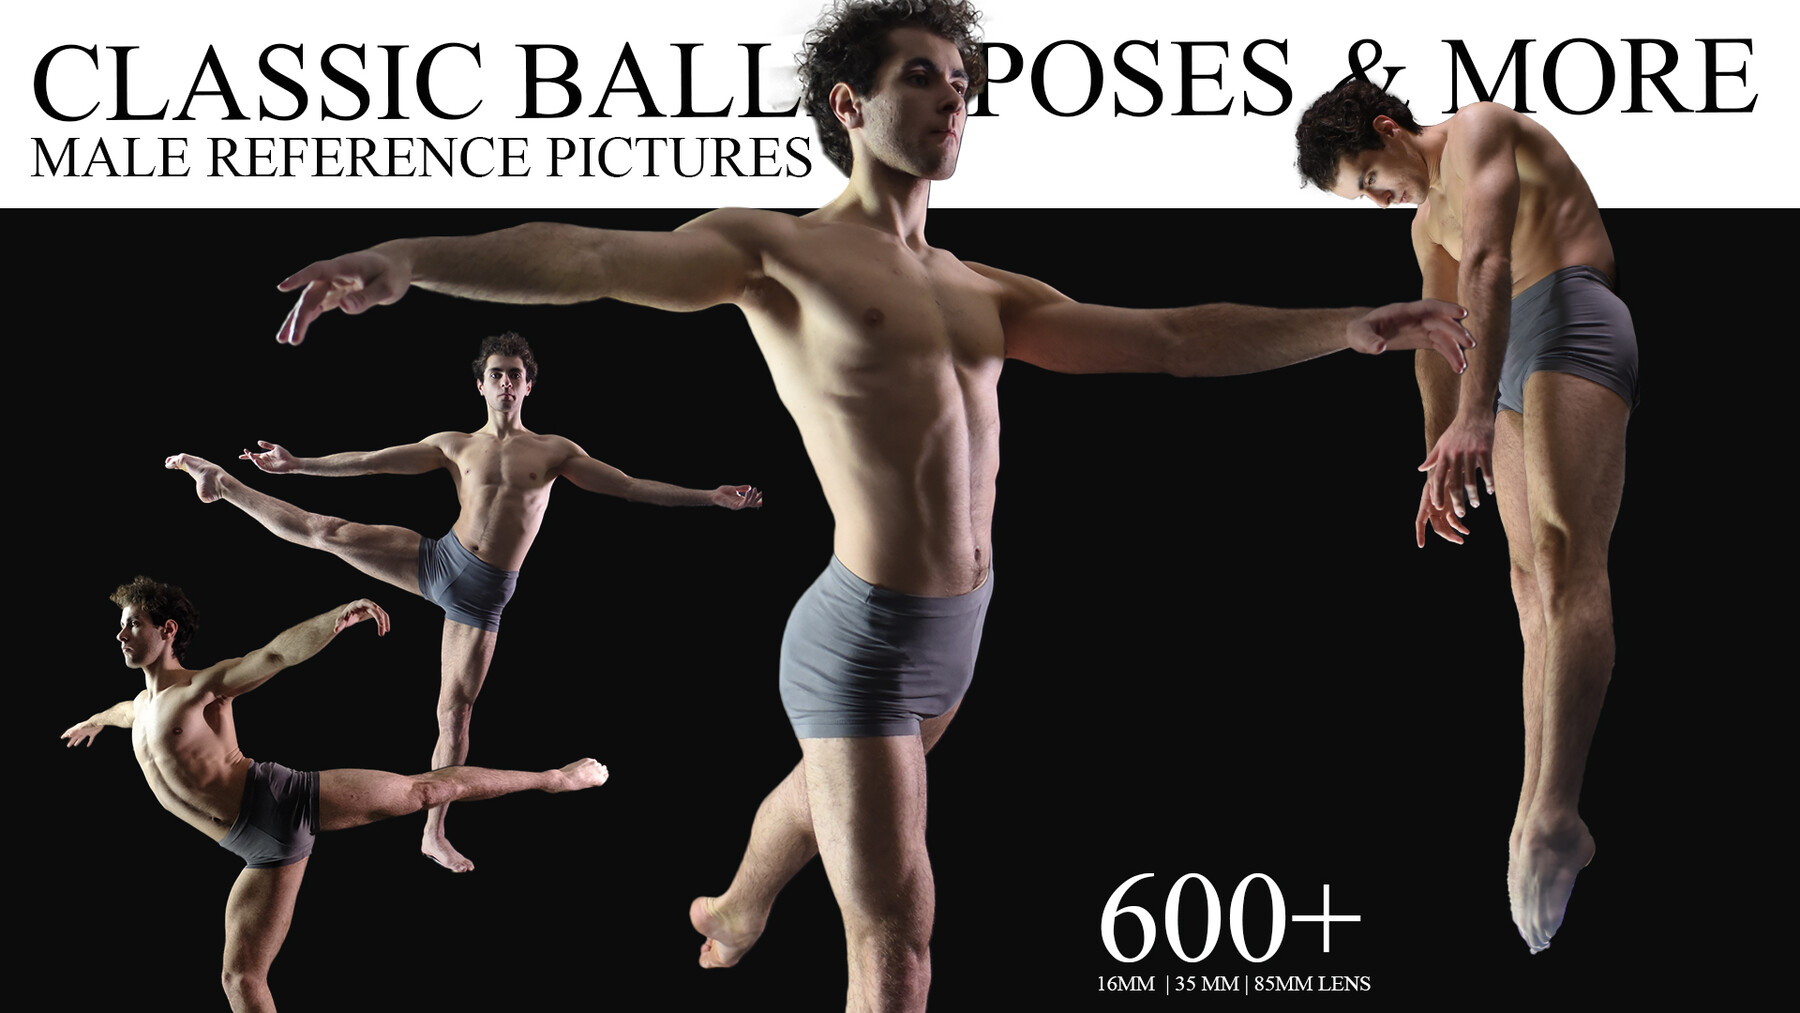 13-03-388 | Male ballet dancers, Dance photography poses, Ballet poses